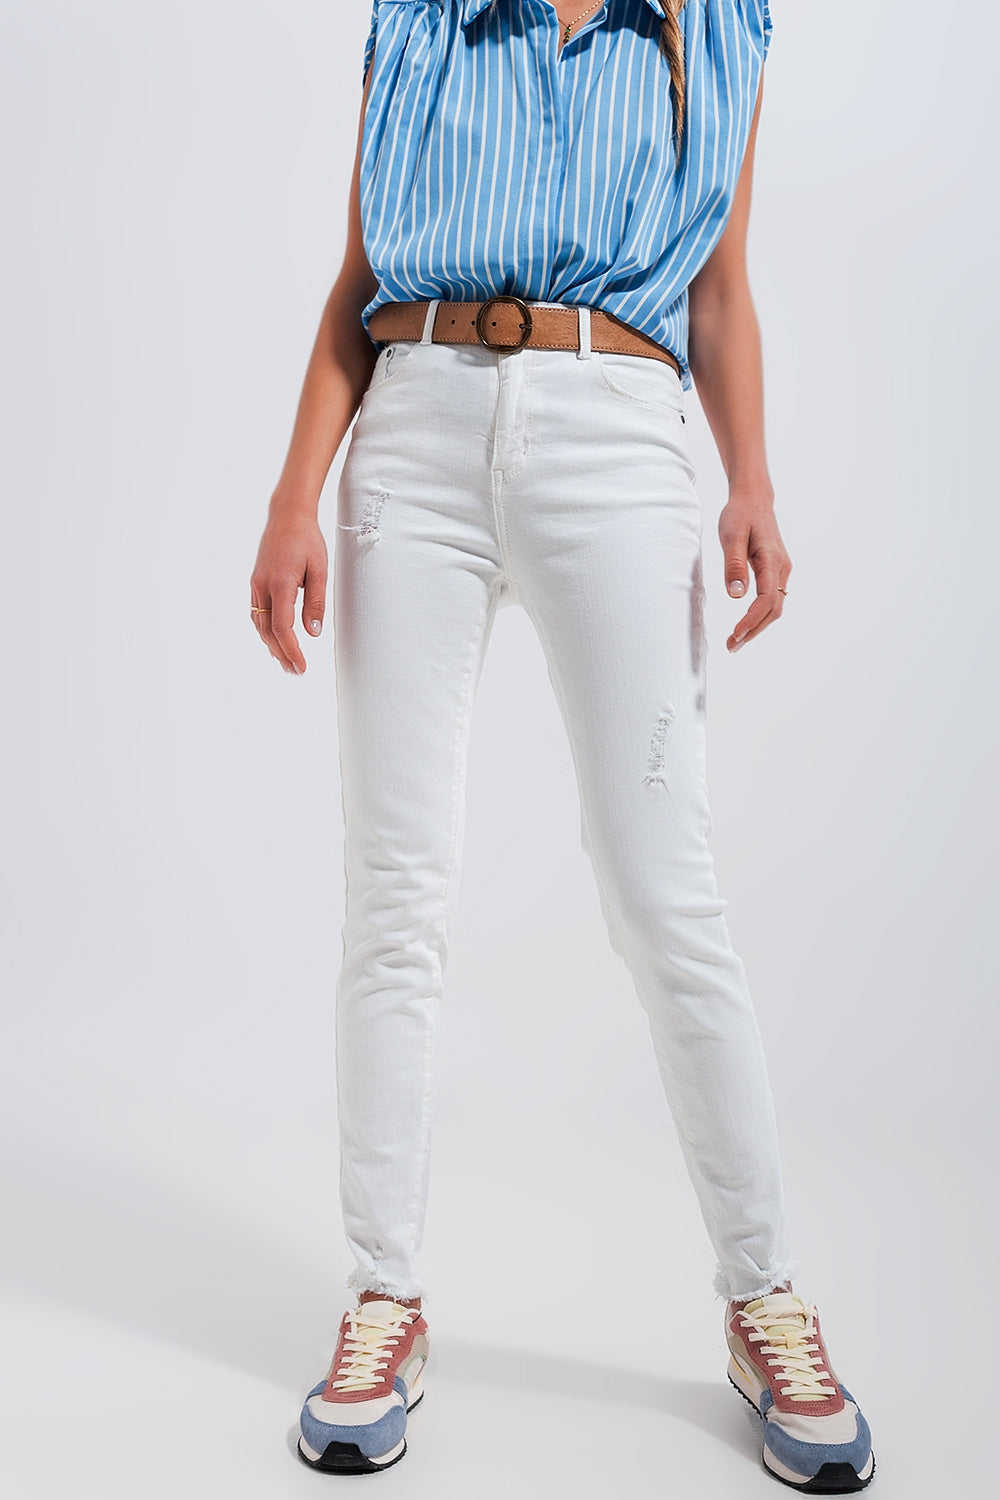 High Waisted Skinny Jeans in White